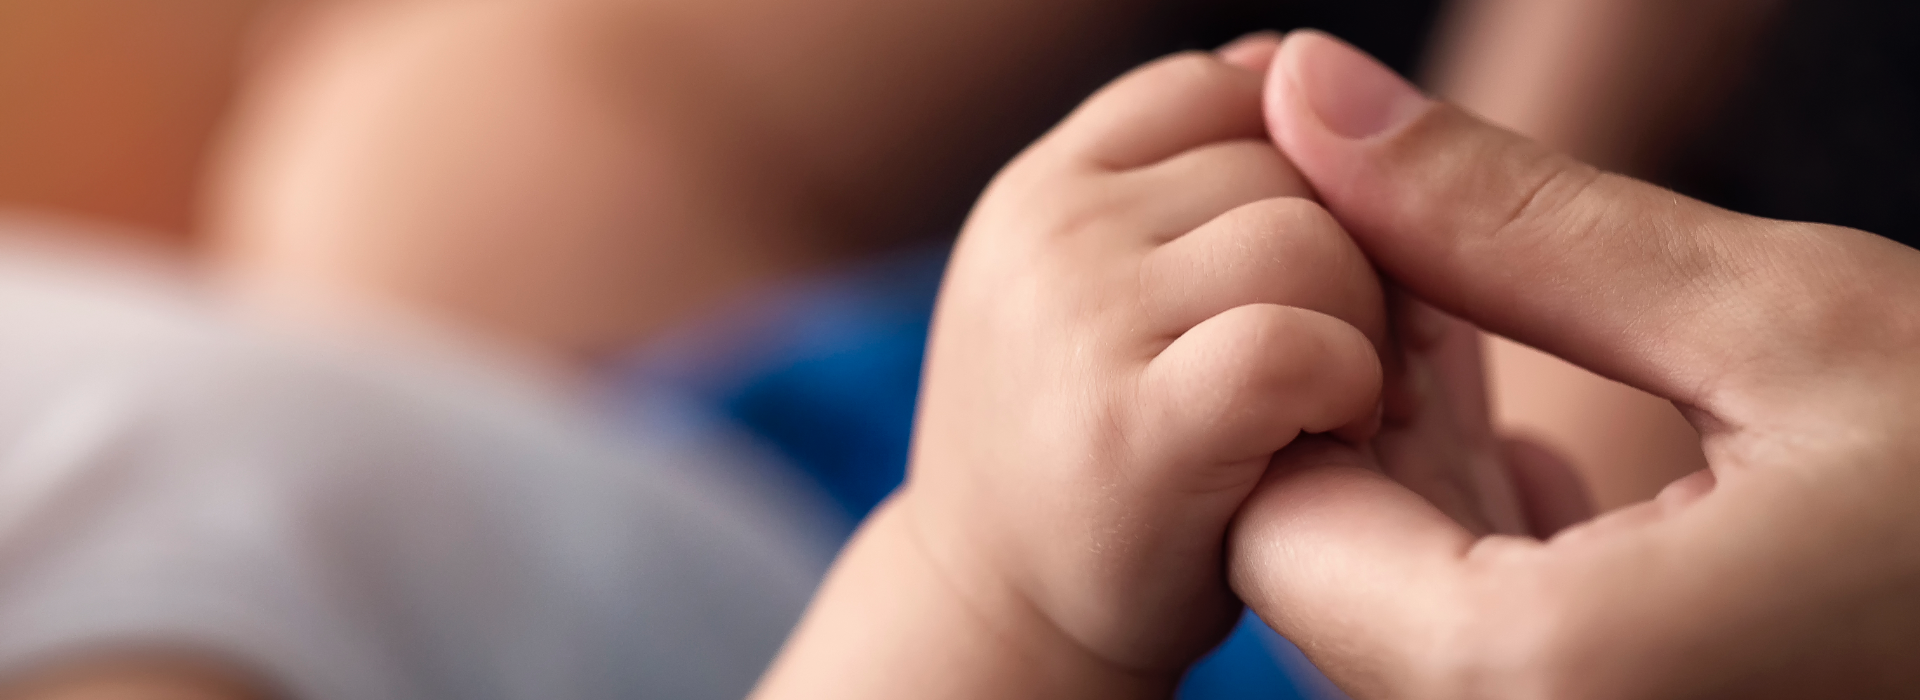 Parent holds hand with baby that suffered birth injuries, that may result in birth injury lawsuits.